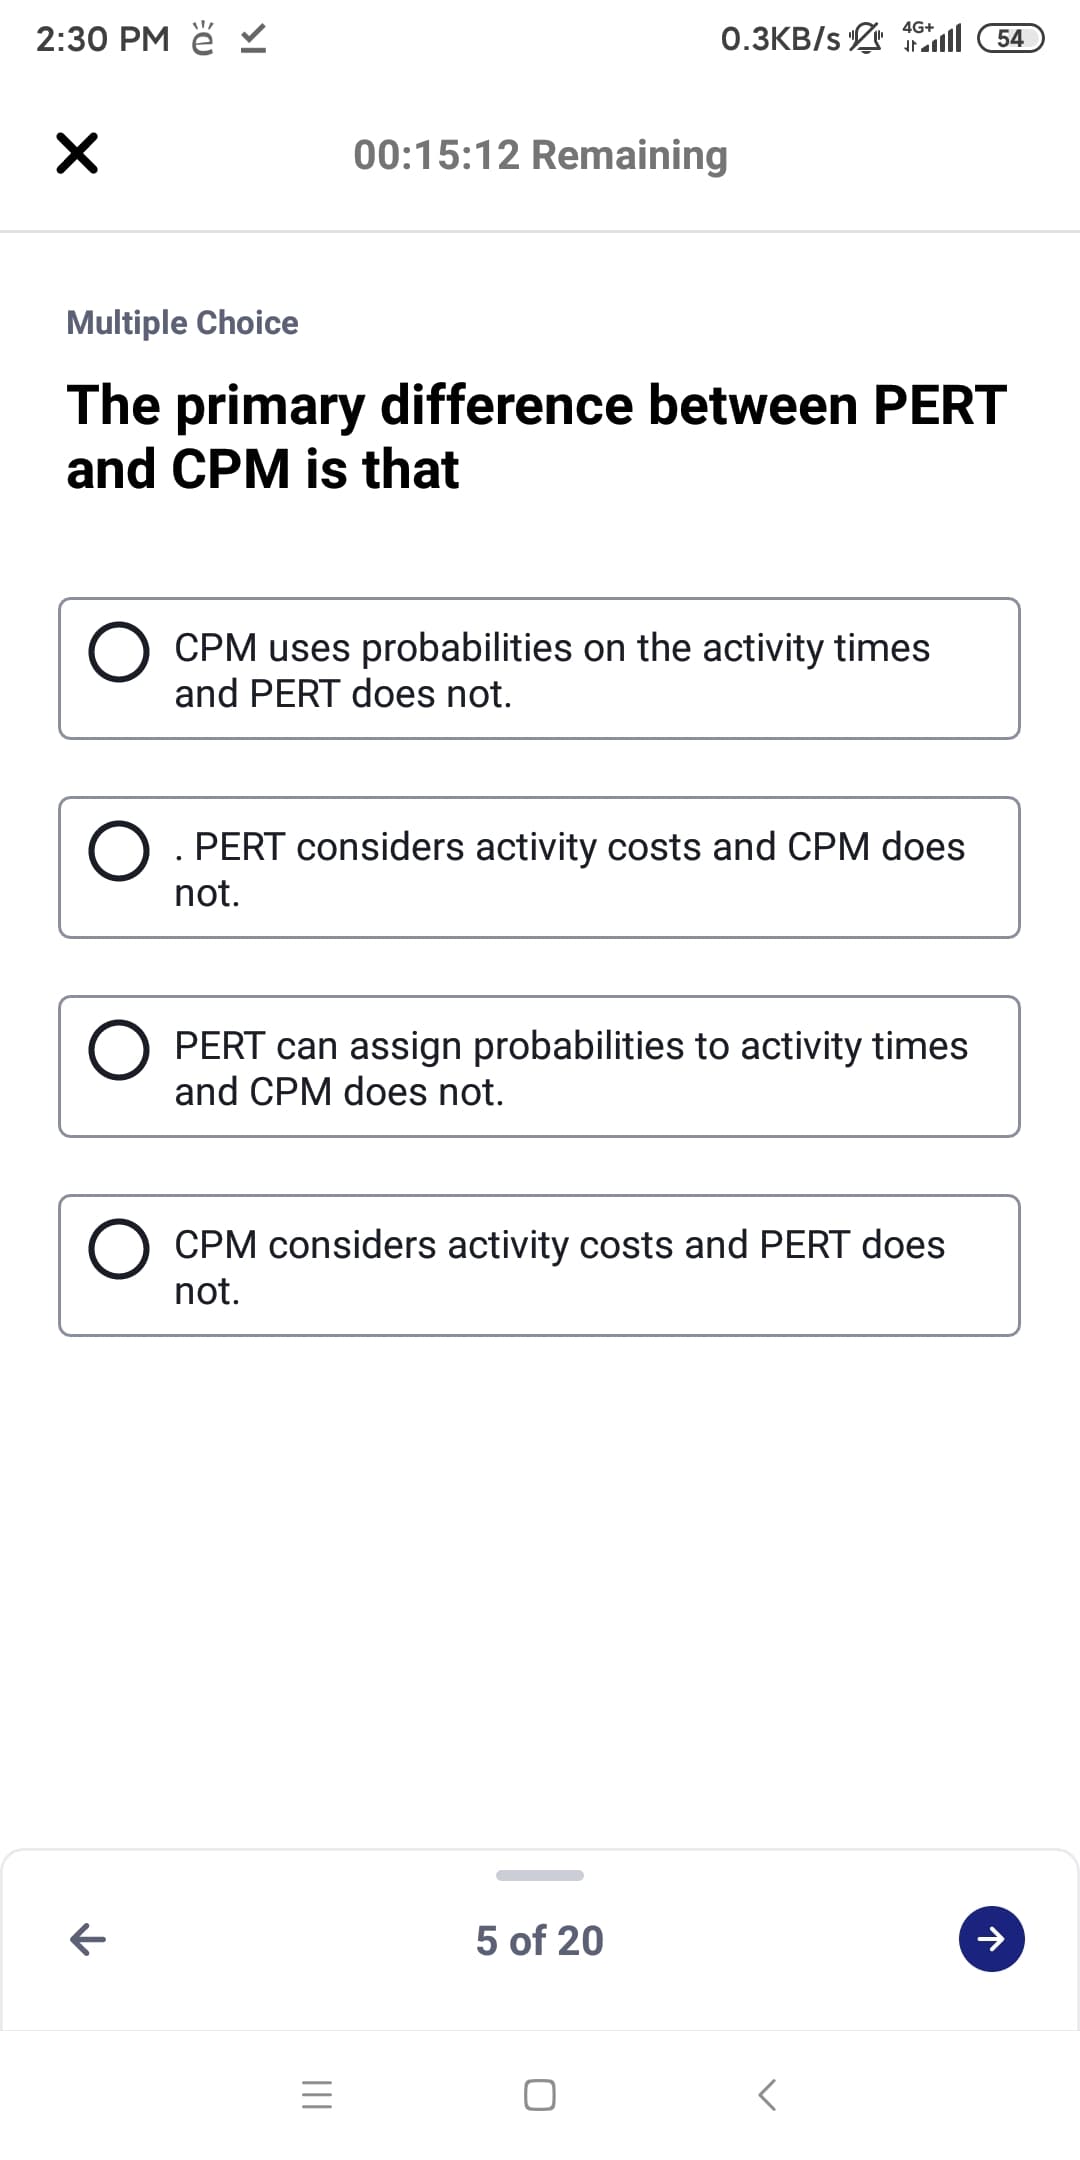 2:30 PM ě
0.3KB/s 1ll 54
4G+
00:15:12 Remaining
Multiple Choice
The primary difference between PERT
and CPM is that
CPM uses probabilities on the activity times
and PERT does not.
O. PERT considers activity costs and CPM does
not.
PERT can assign probabilities to activity times
and CPM does not.
CPM considers activity costs and PERT does
not.
5 of 20
II
